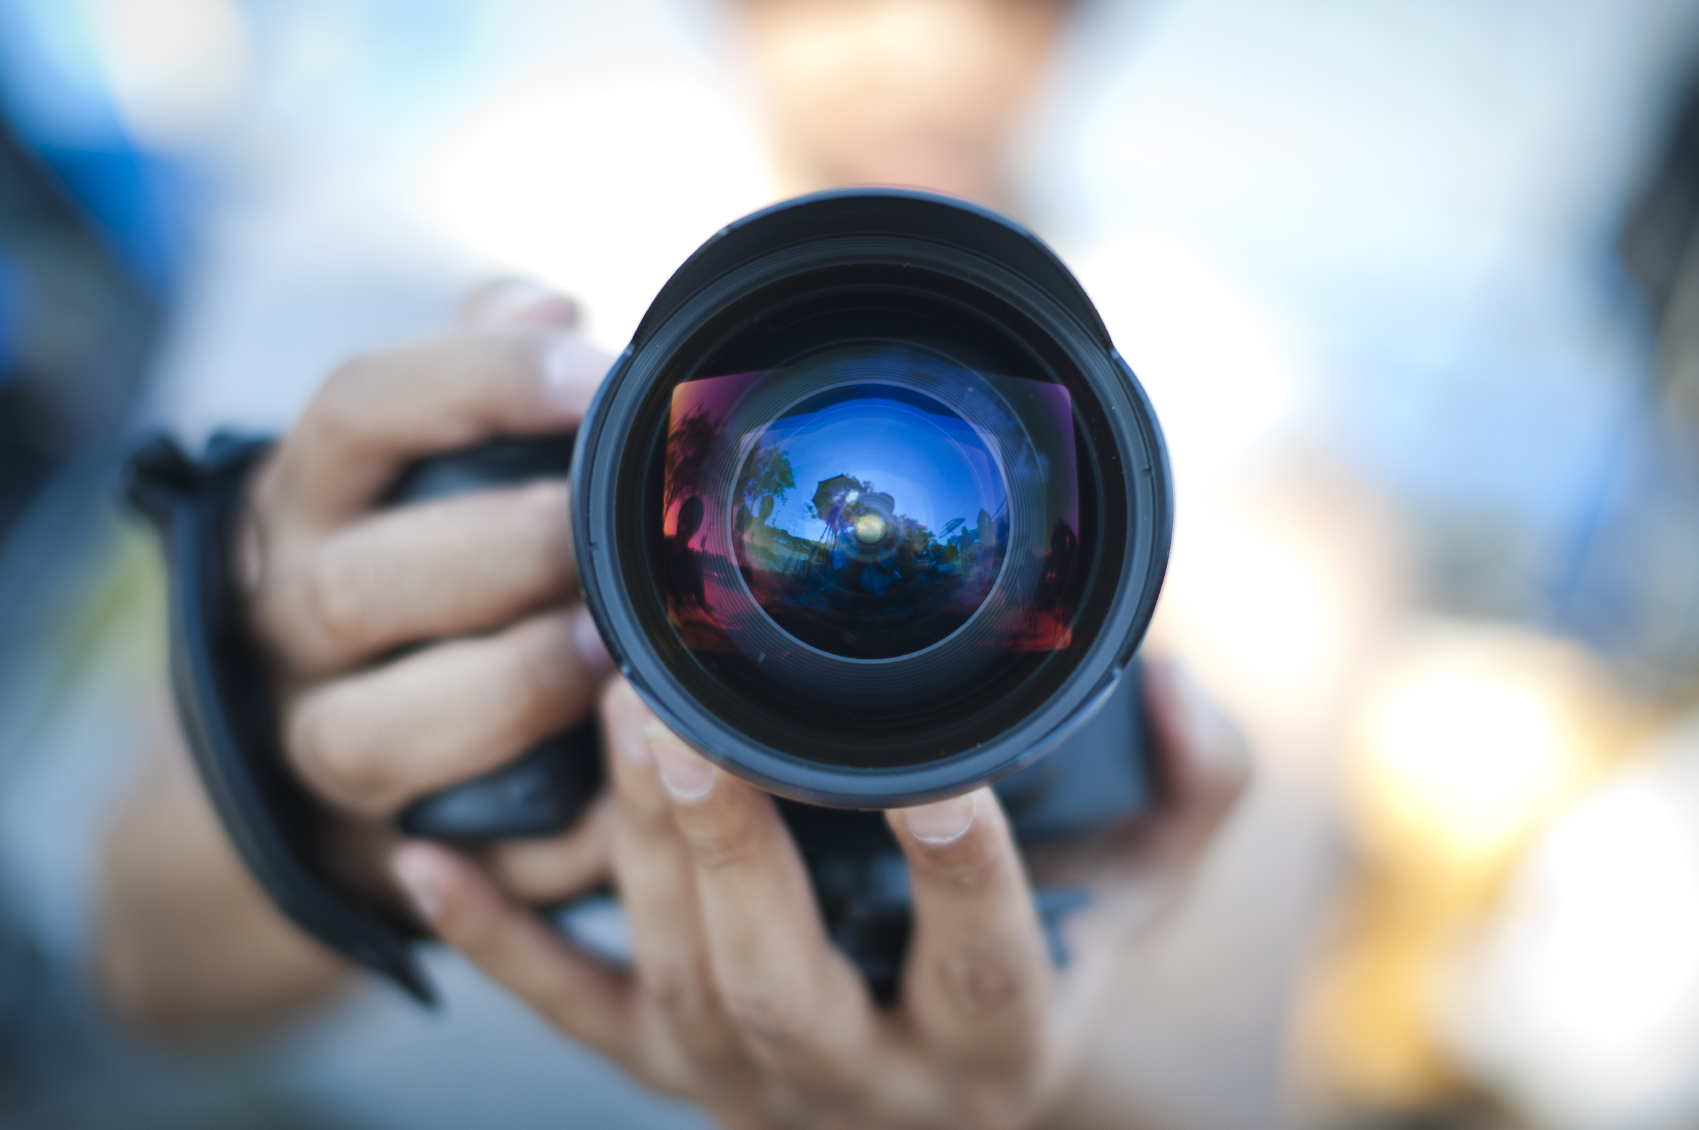 SEO Tips for Photographers